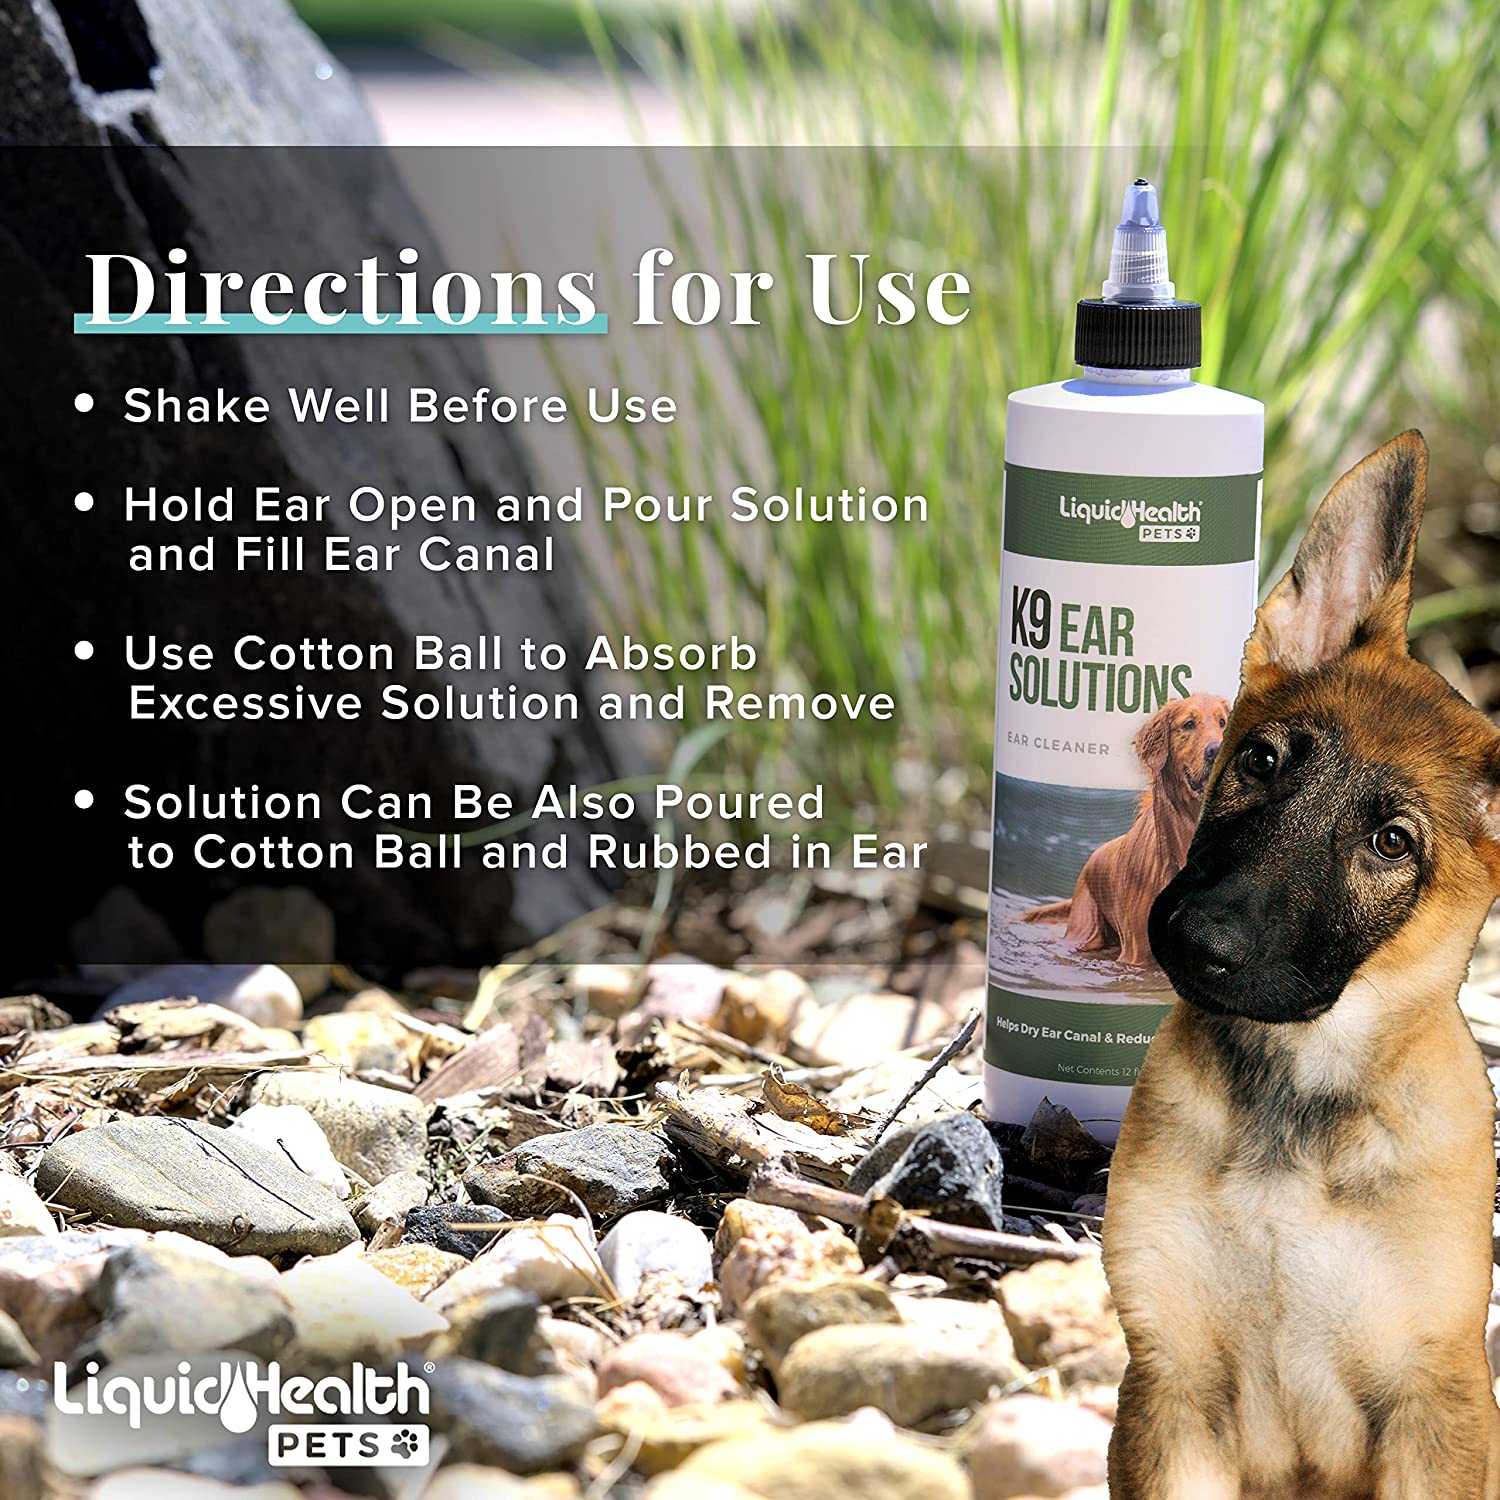 Liquid-Health-Pets-k9-Ear-Directions-For-Use